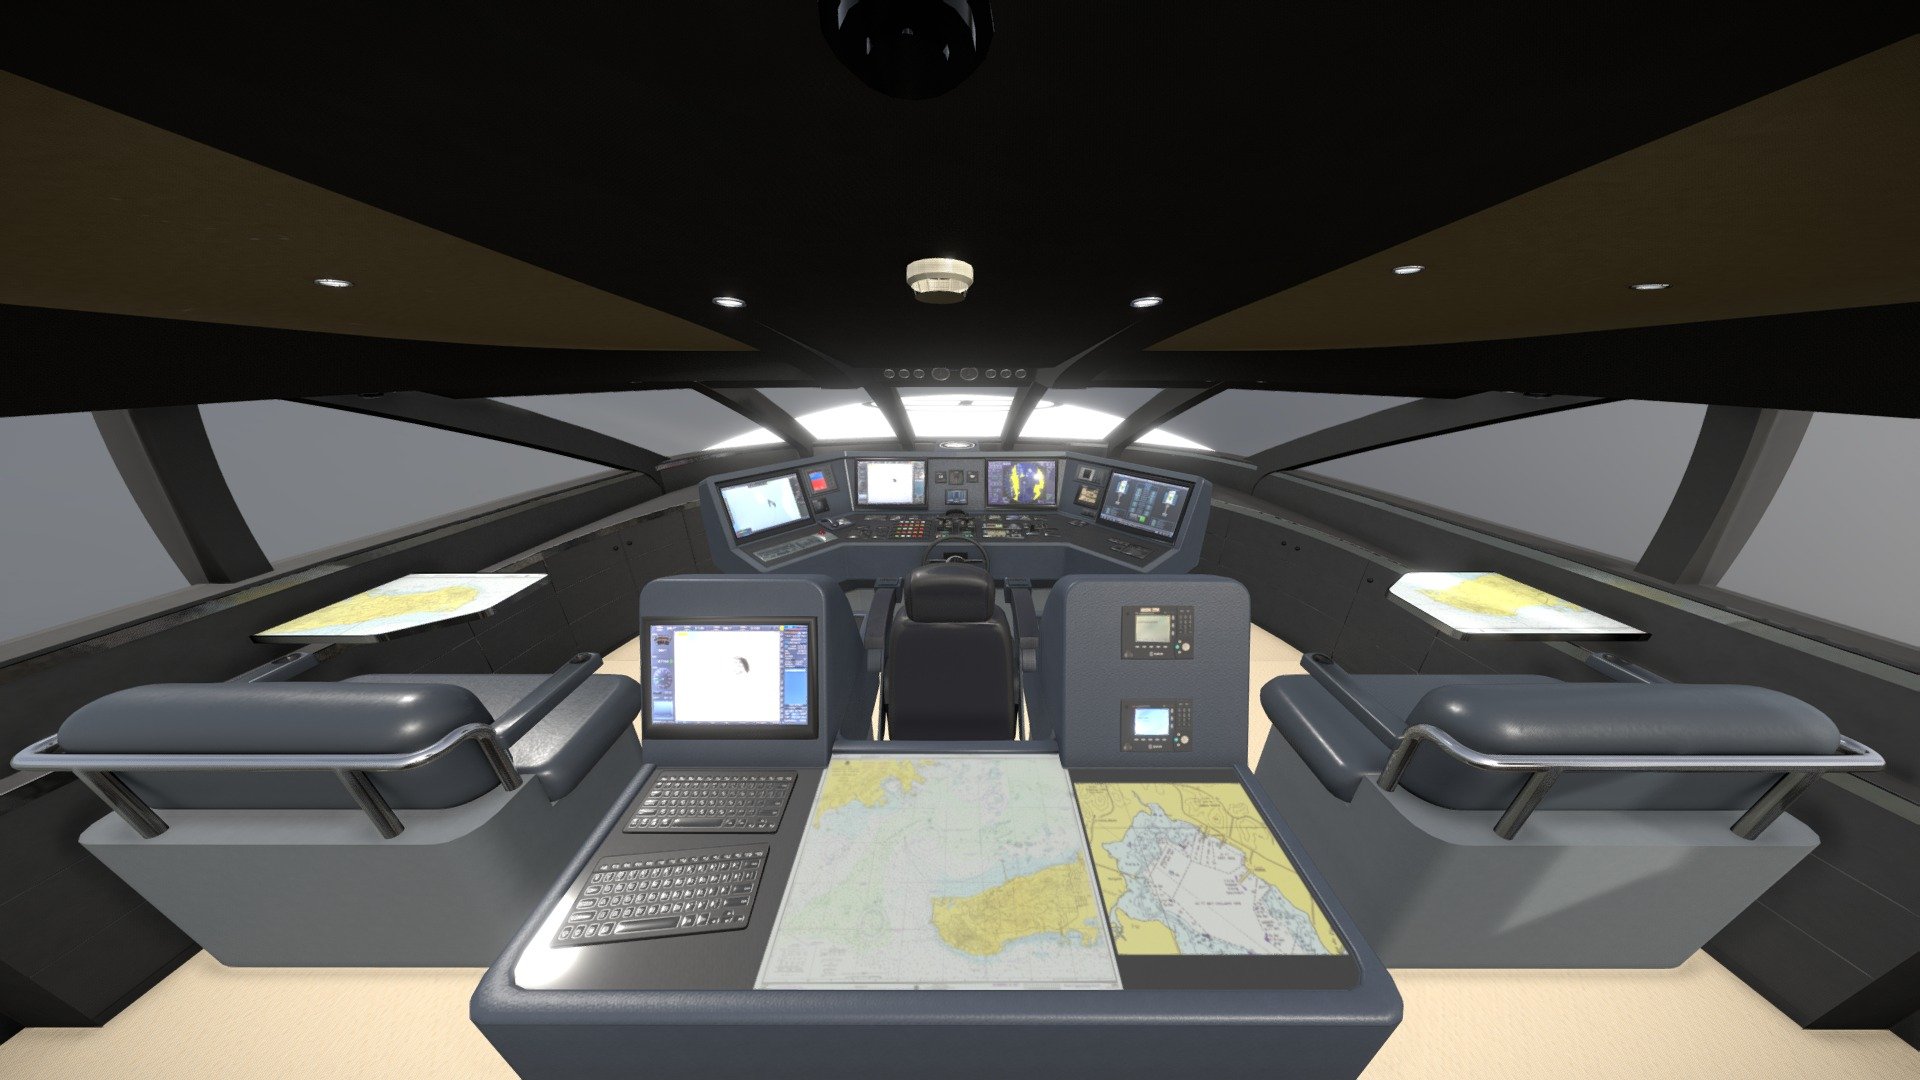 Wheelhouse compartment of Dragonfly yacht. All objects have PBR materials and textures. The interior has been modeled and scaled using reference images and yacht blueprints 3d model